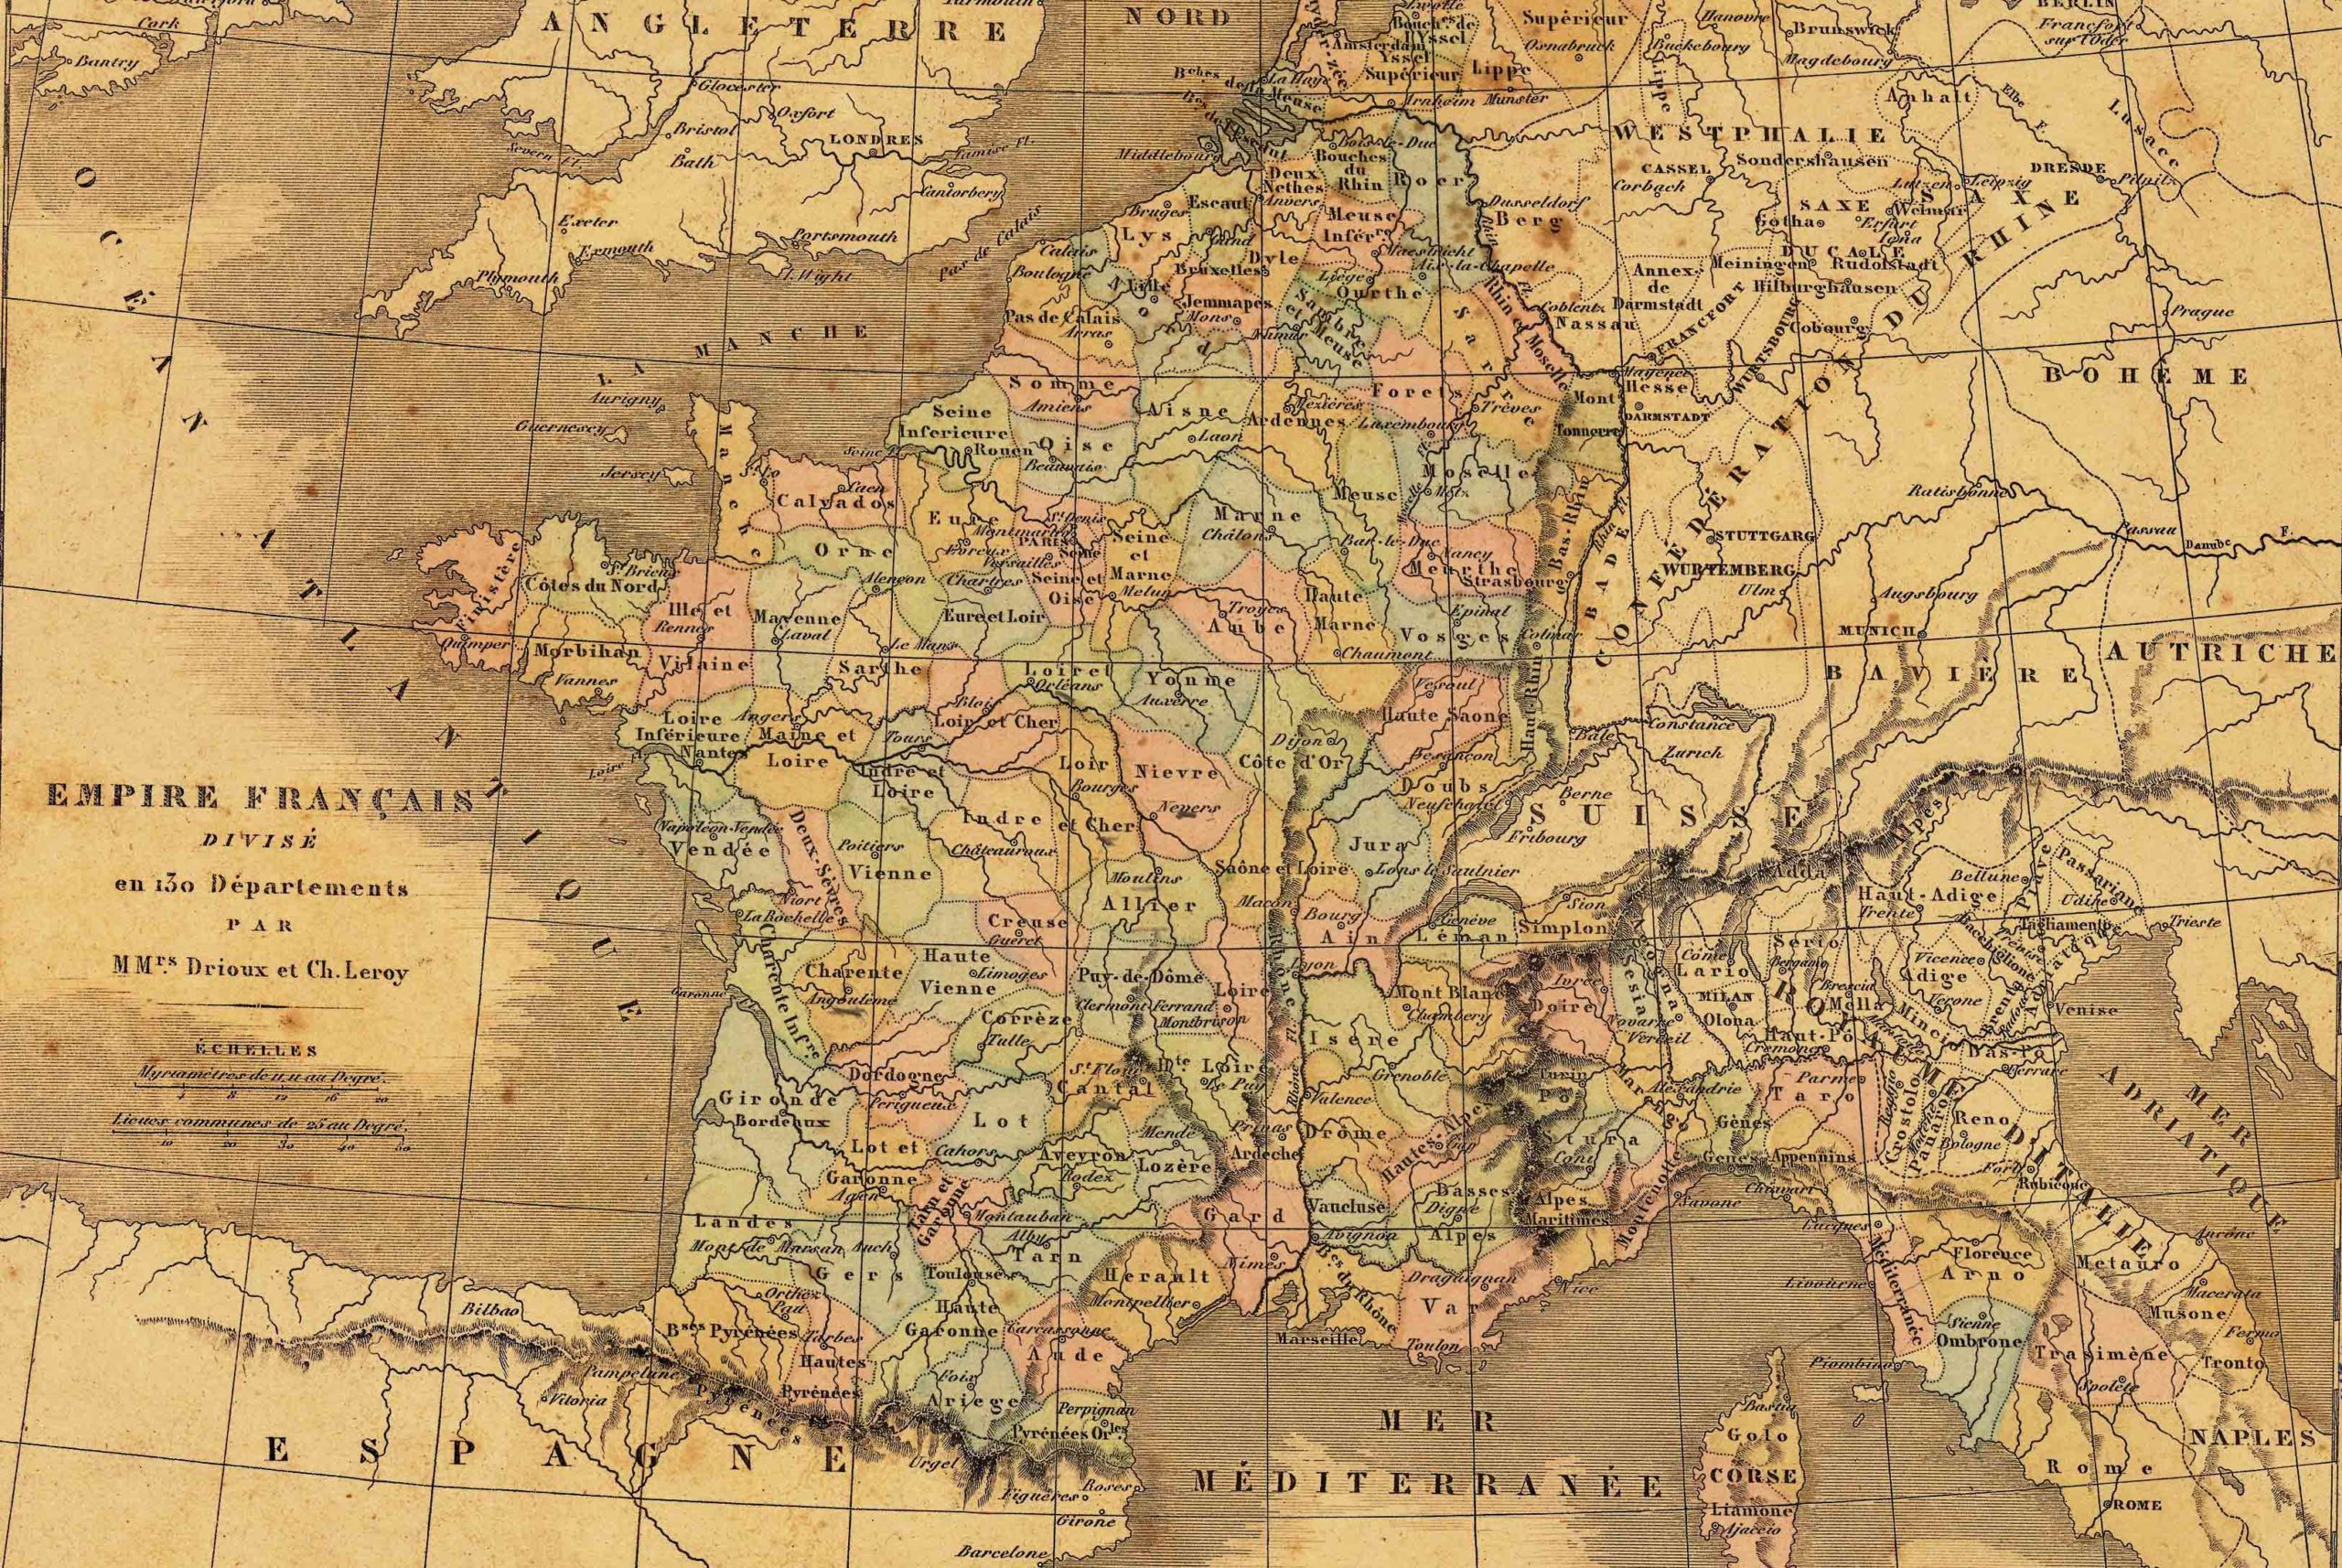 How France got its name Featured Image [Public Domain via Wikimedia Commons]